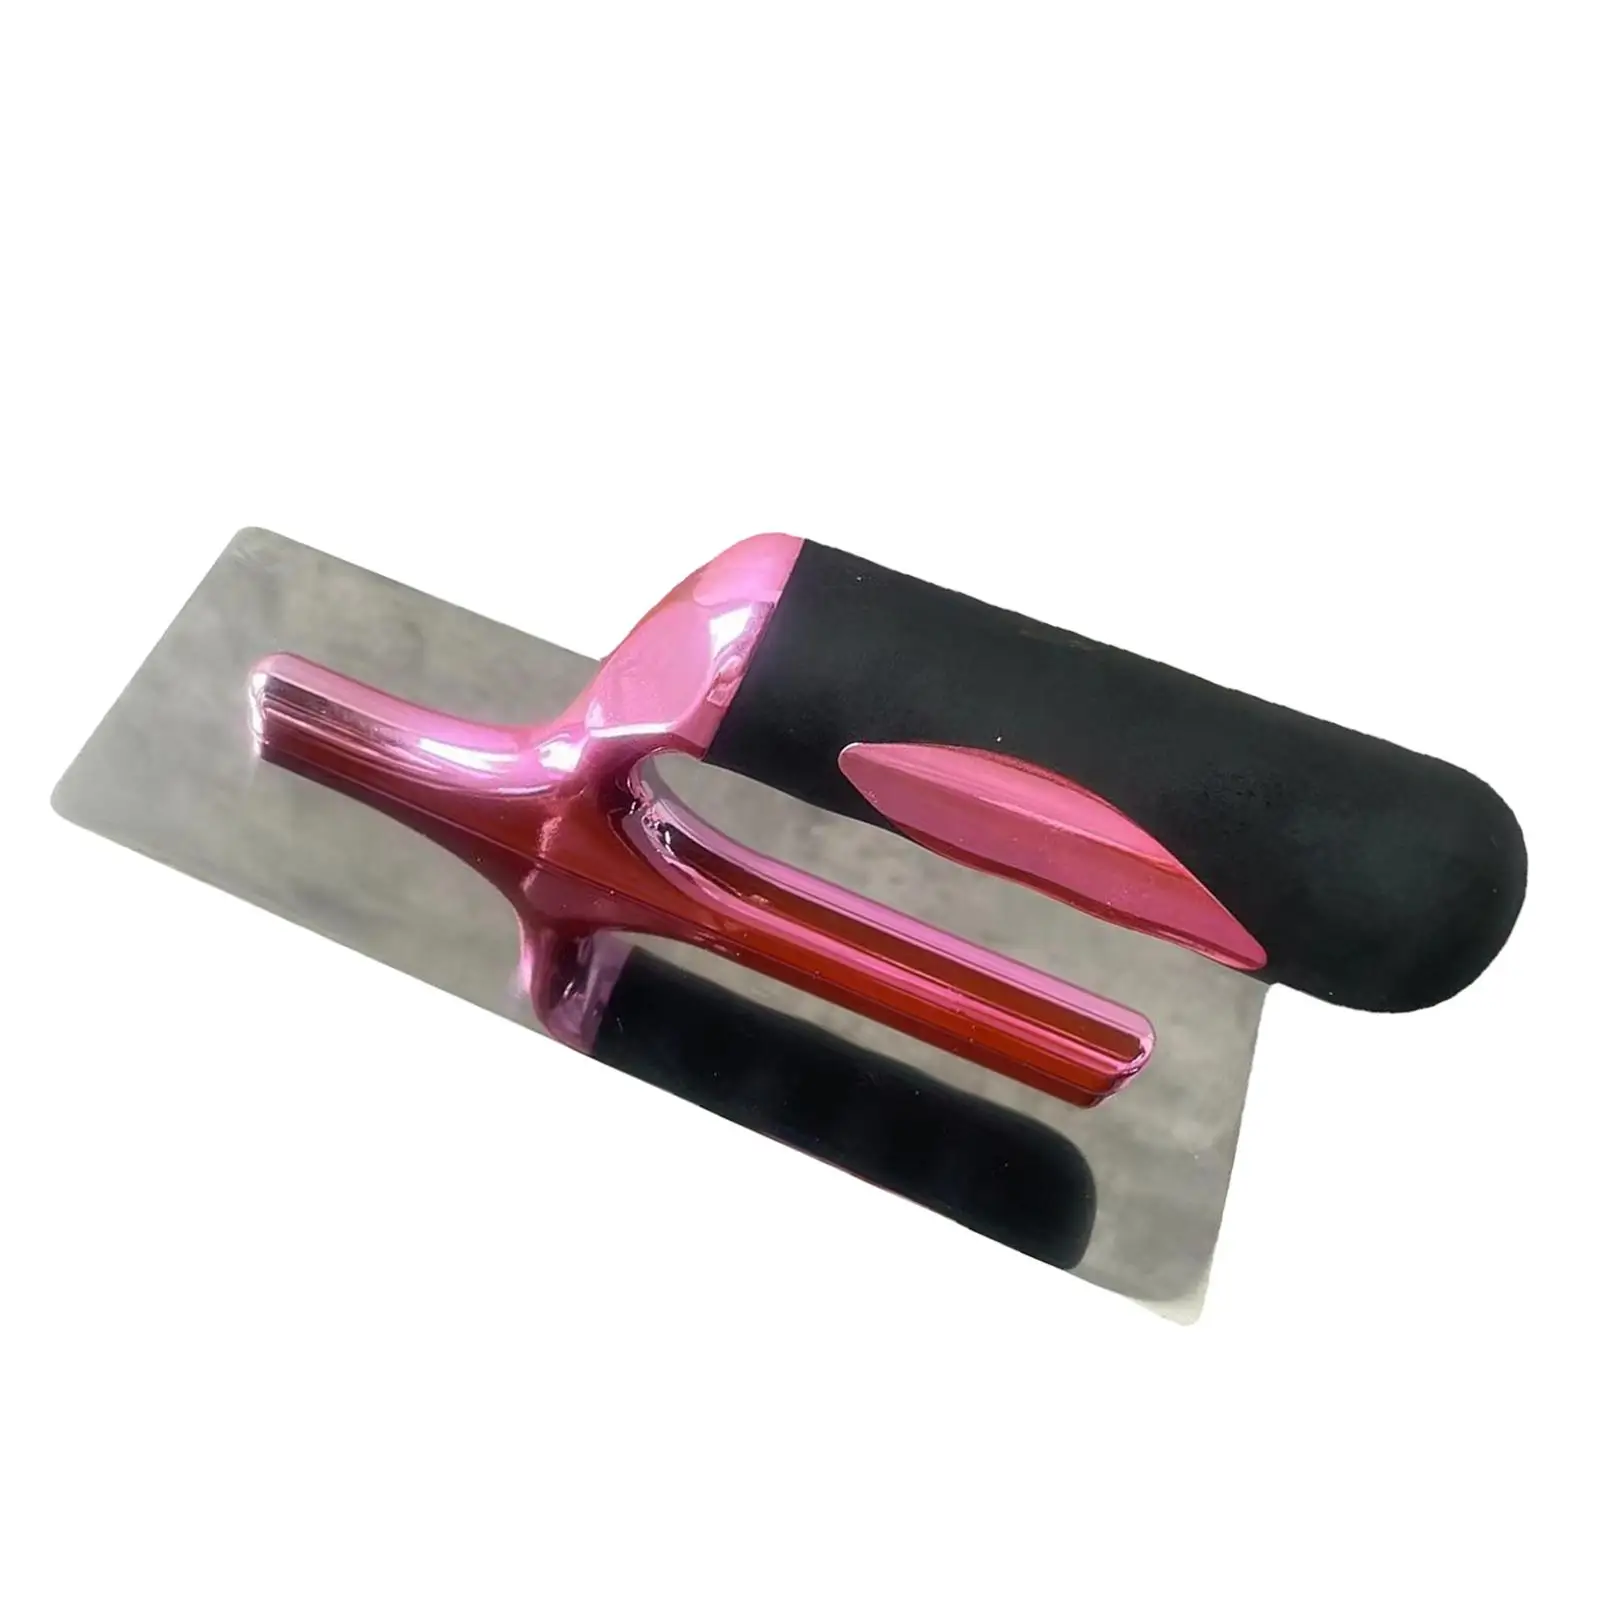 Finishing Trowel Drywall Trowel for Applying Putty Home Decorating Concrete